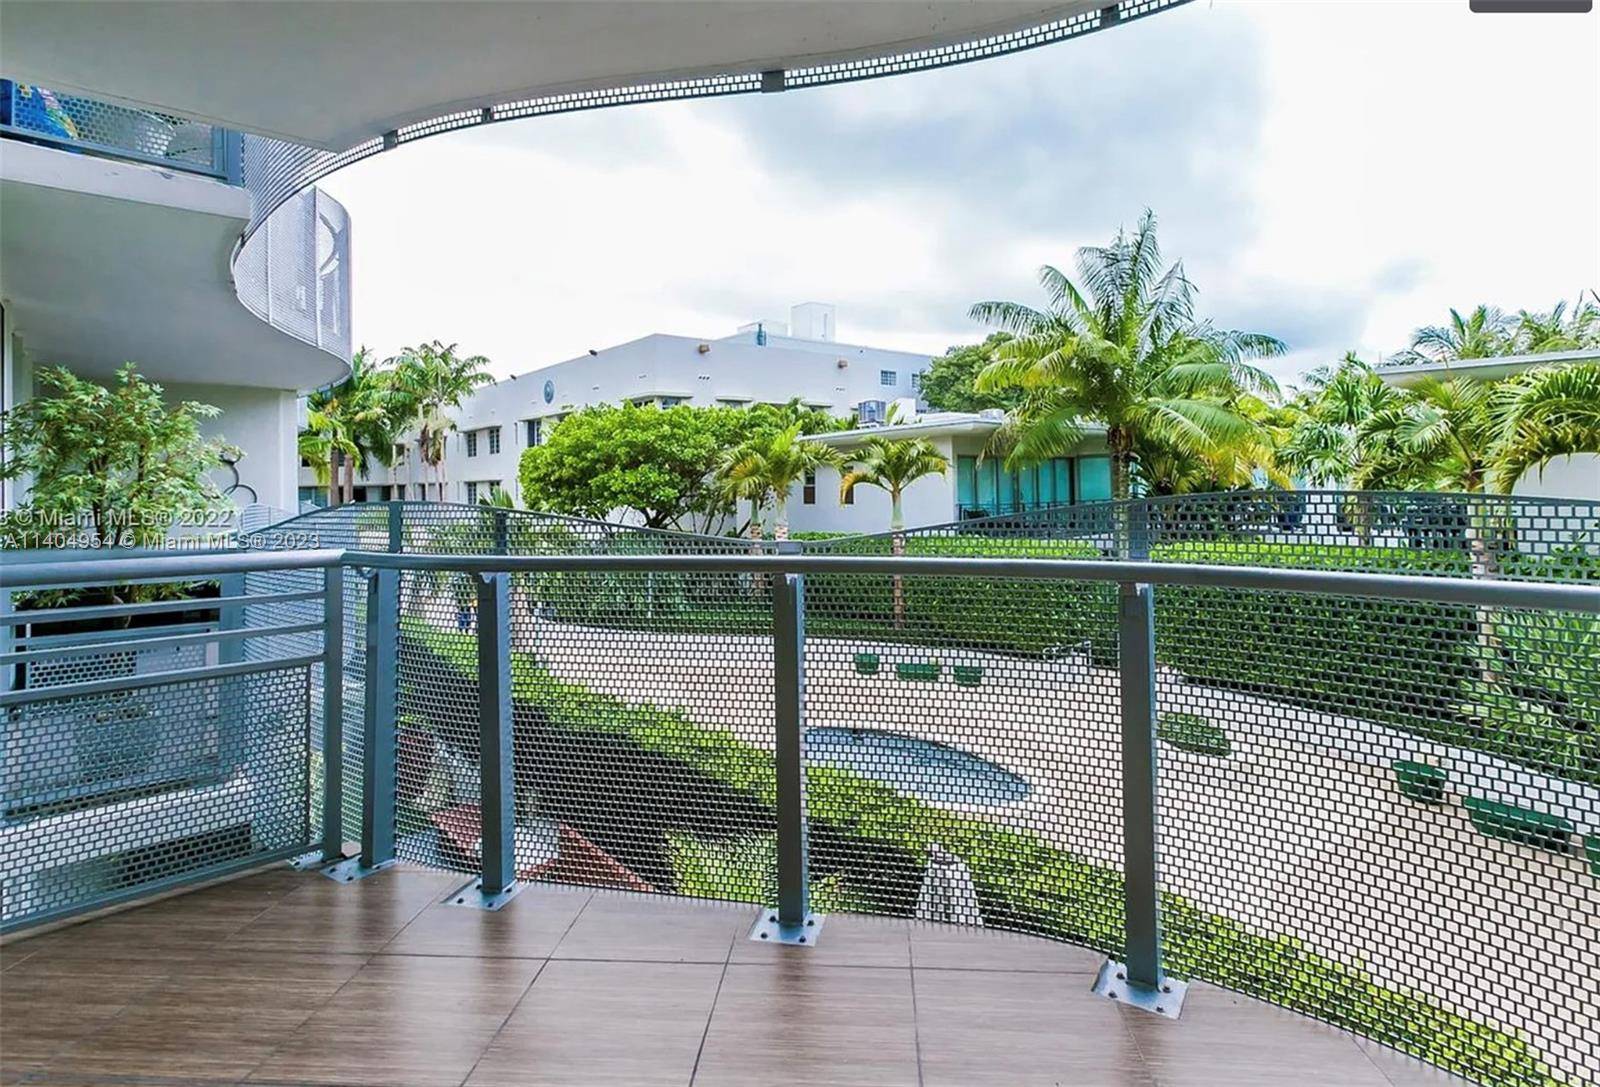 LOCATION RARE FIND UNFURNISHED UNIT in the Heart of South Beach, just 1 block away from the Ocean !